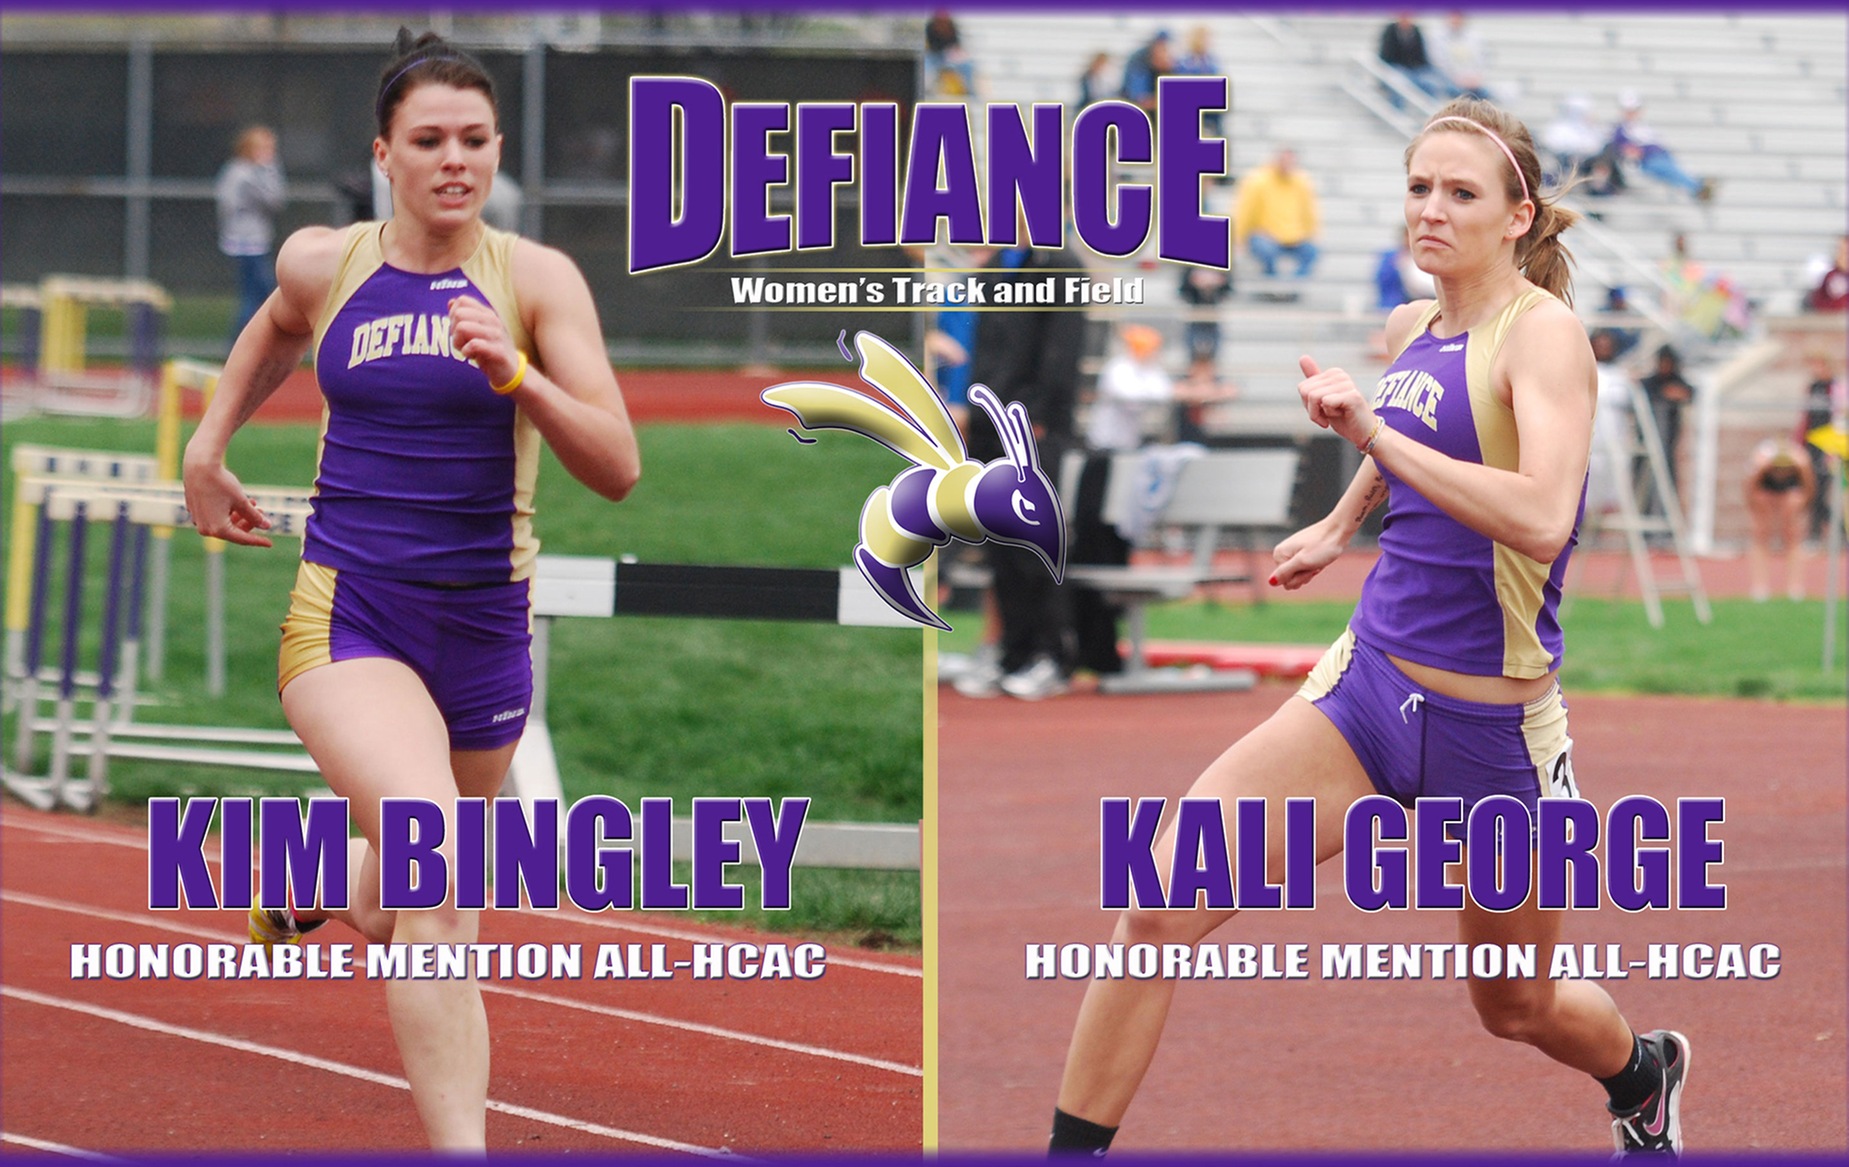 Bingley and George Named Honorable Mention All-HCAC